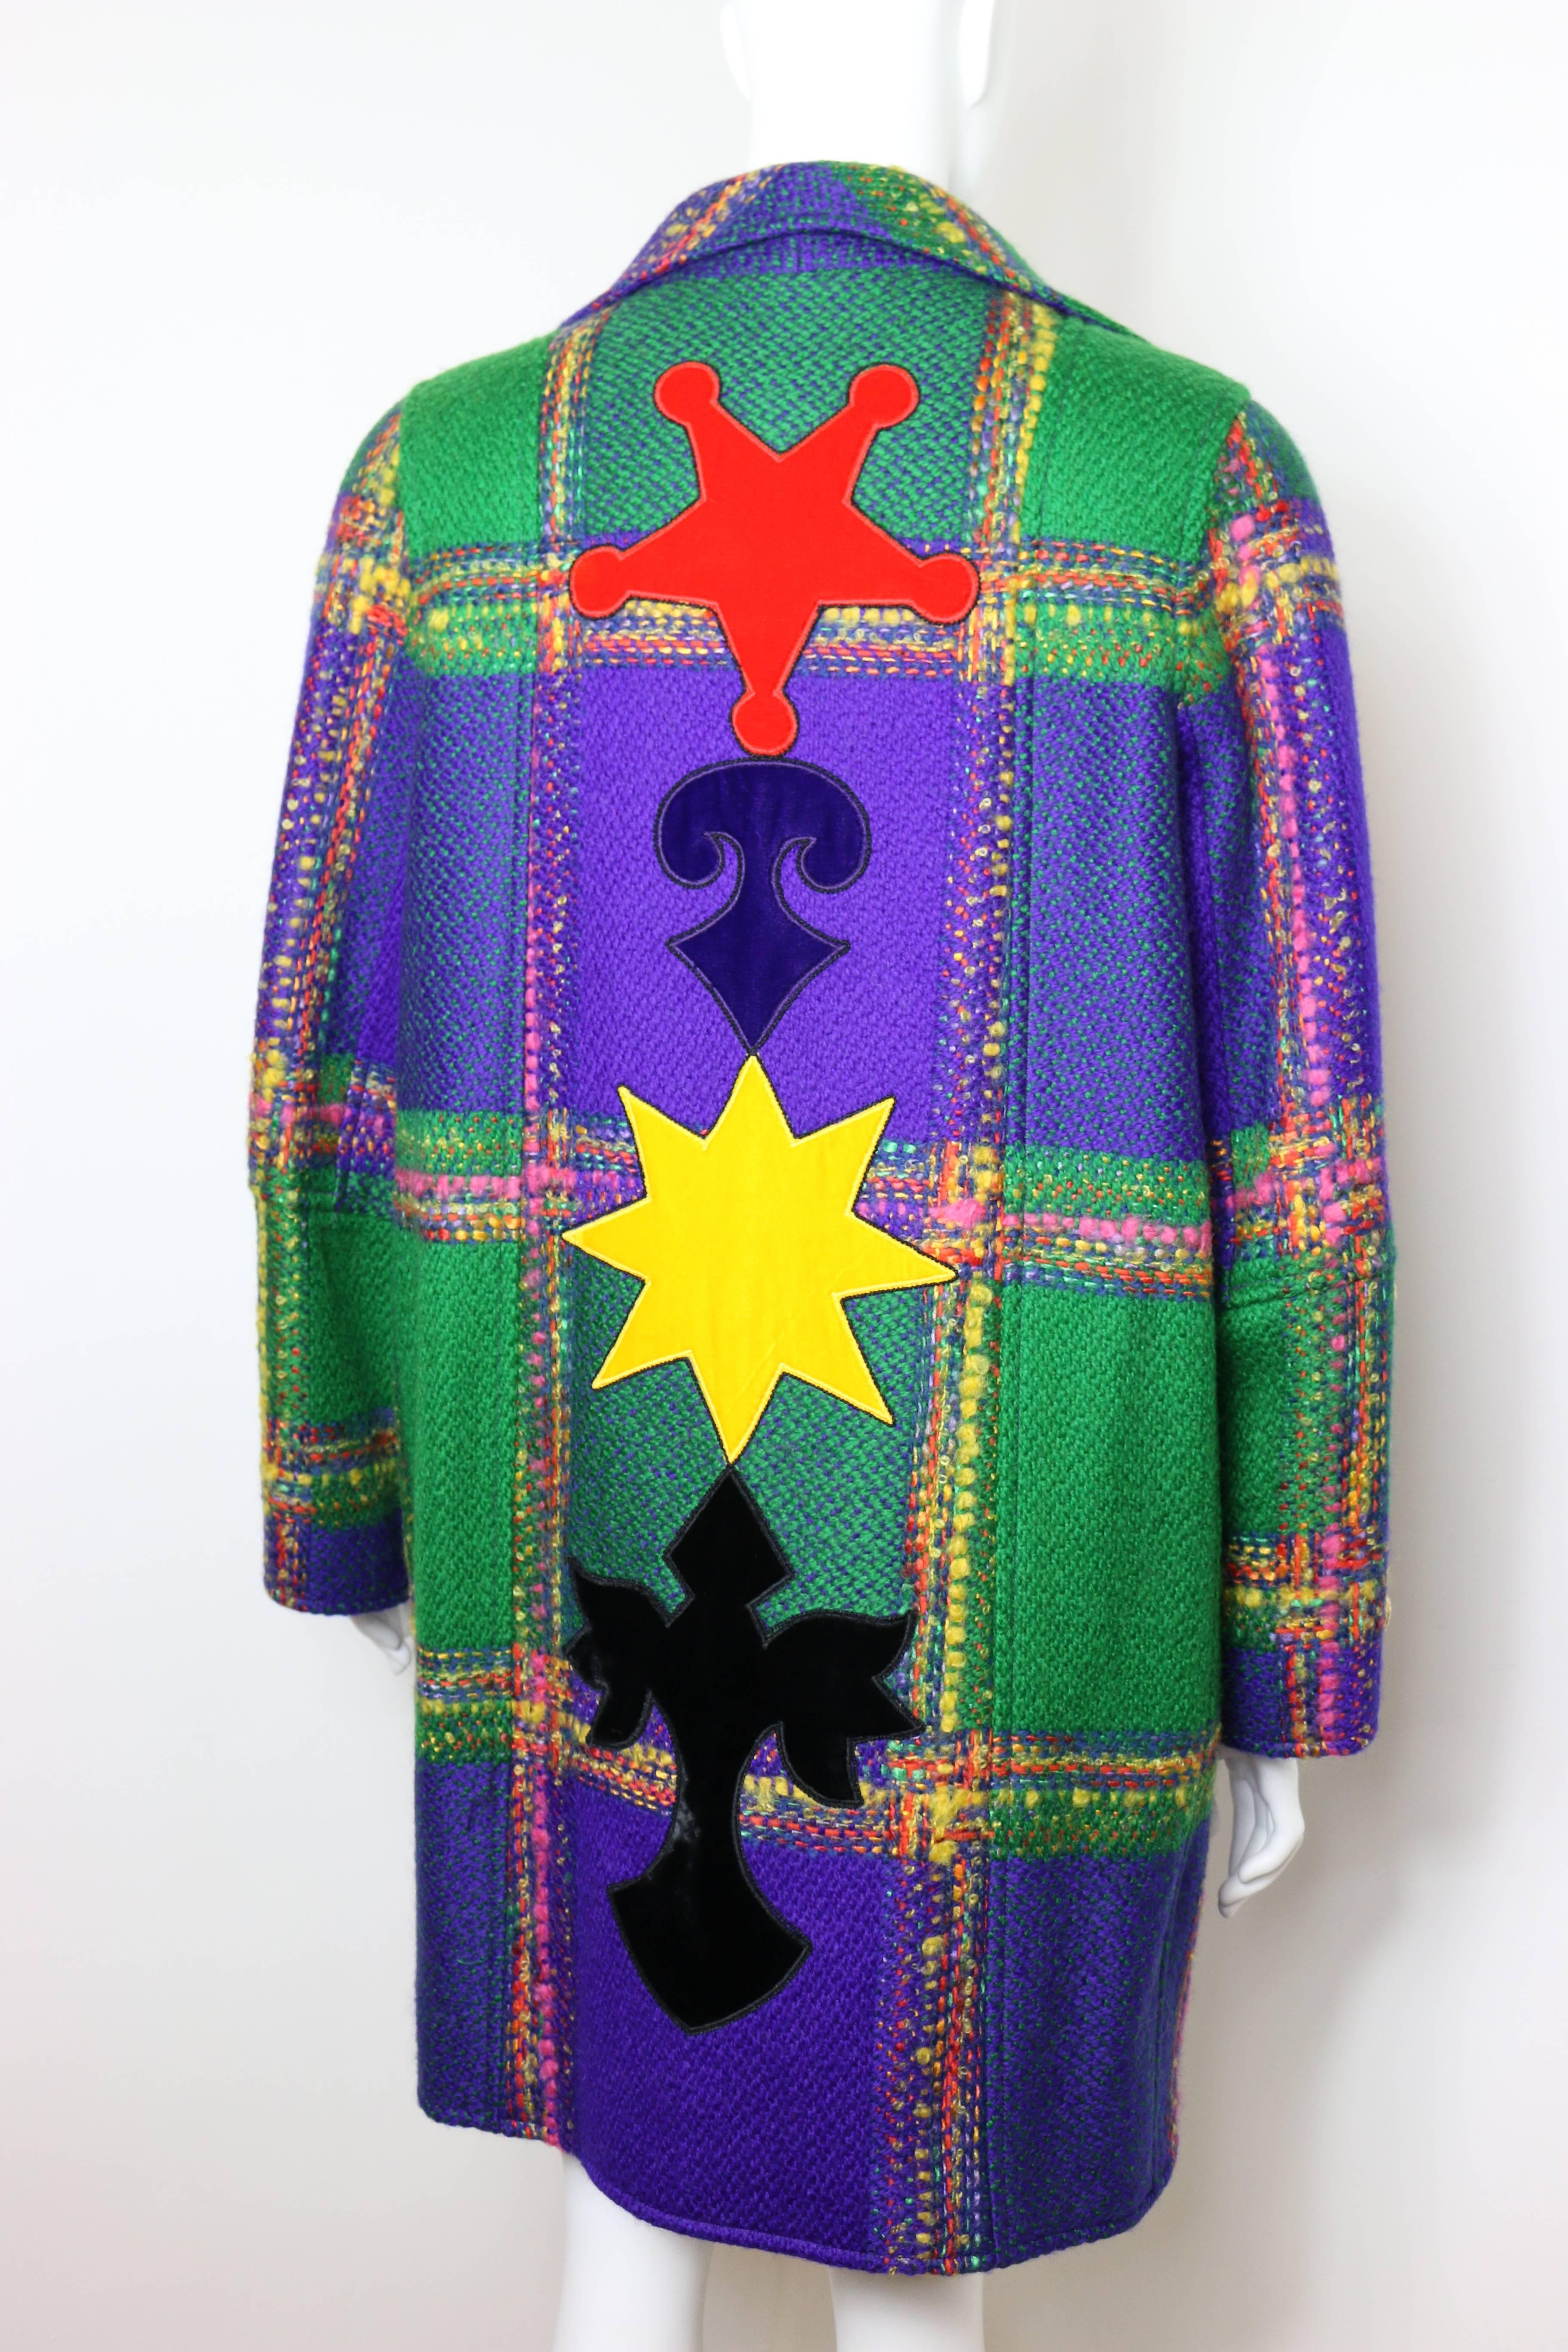 - This beautiful and rare find early 90s Christian Lacroix multi-coloured wool tweed plaid coat is one of a kind! Featuring gripoix buttons. 

-  Velvet embroidered patterns at the back. 

- Jacket: 85% Wool I 15% Rayon, Lining: 100% Rayon

- Made